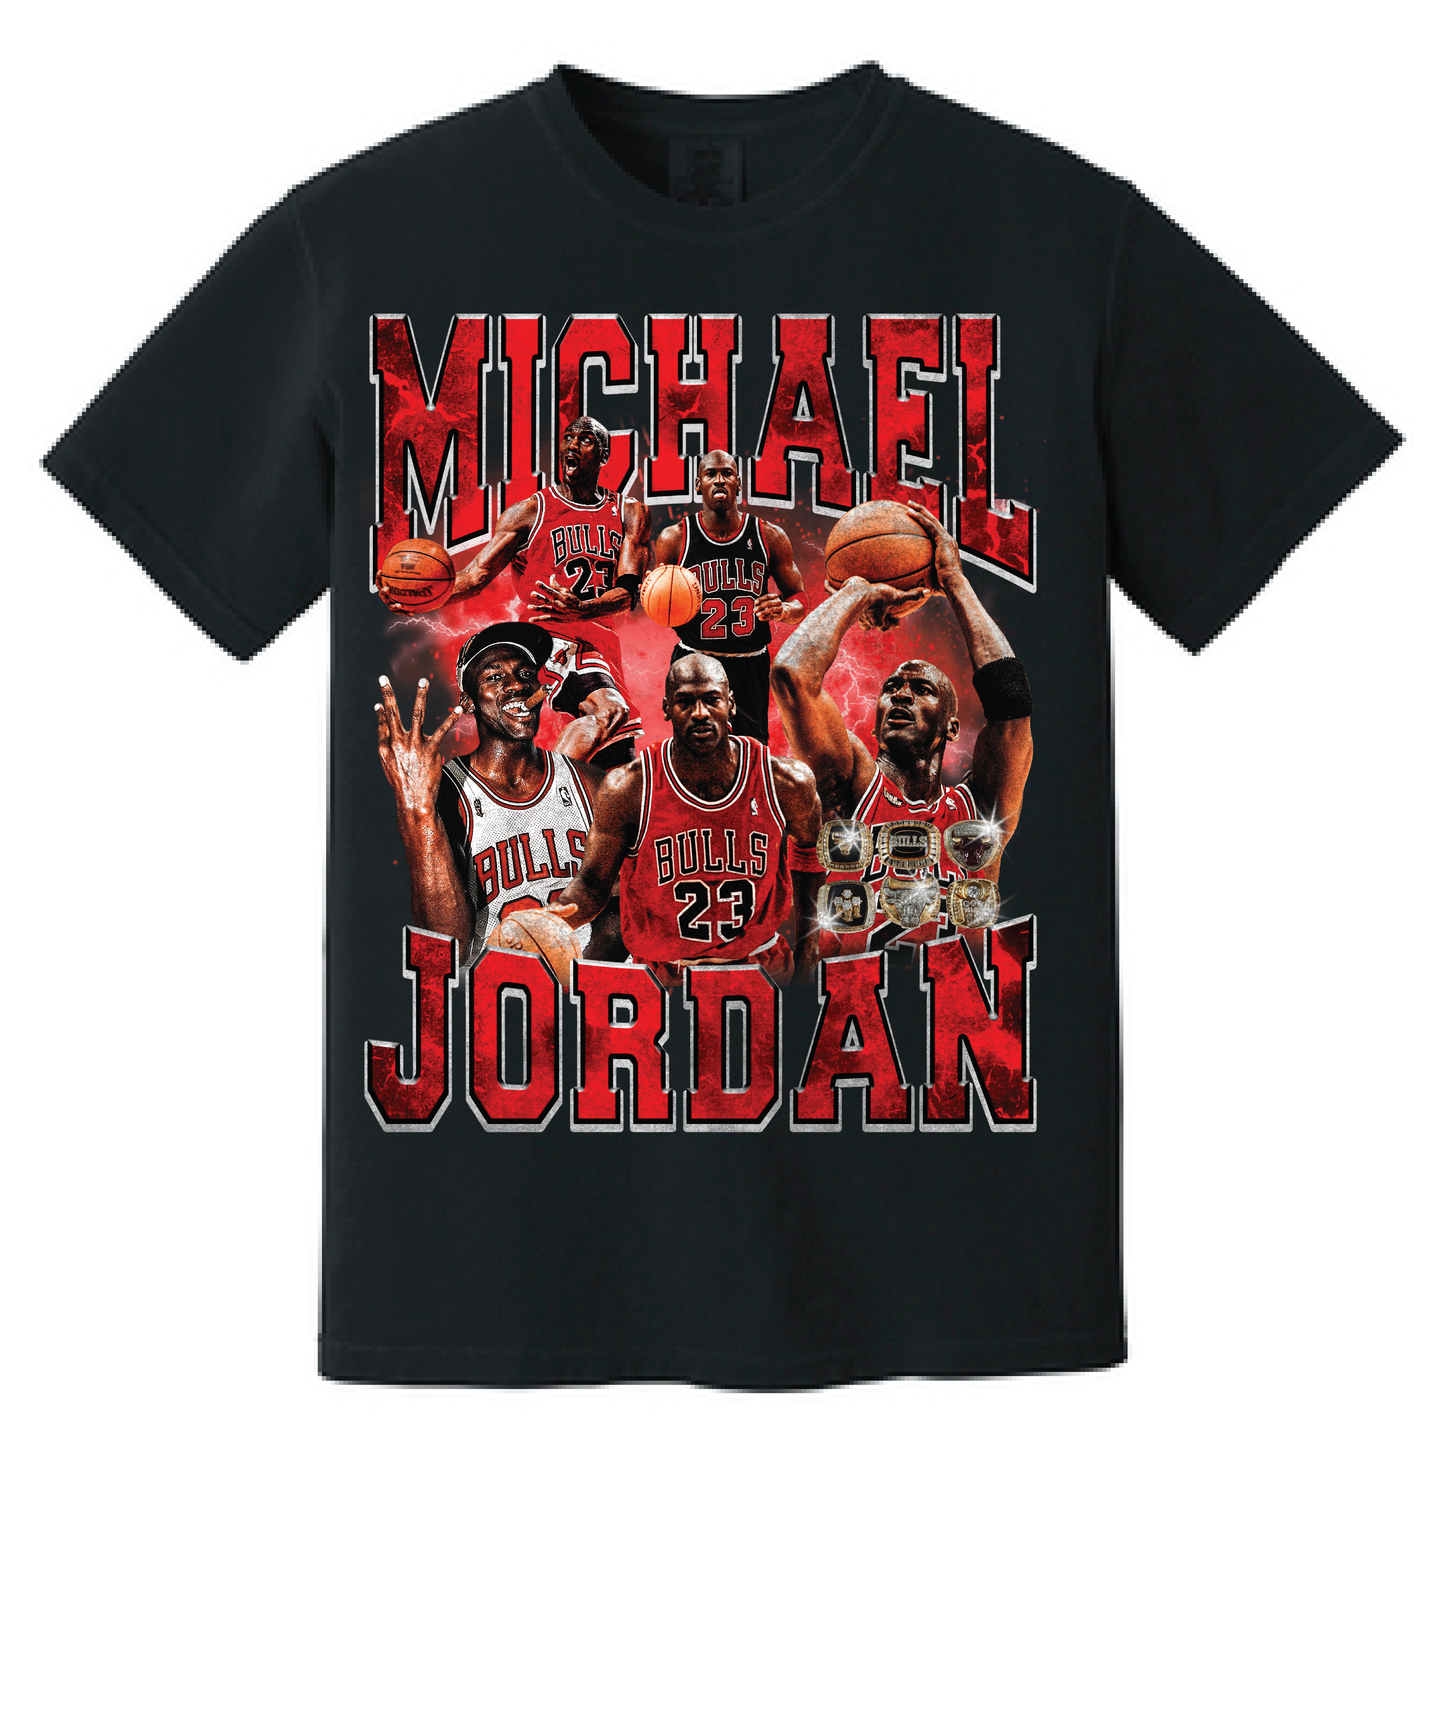 Step Up Your Game with this Michael Jordan Vintage 90's Style T-shirt